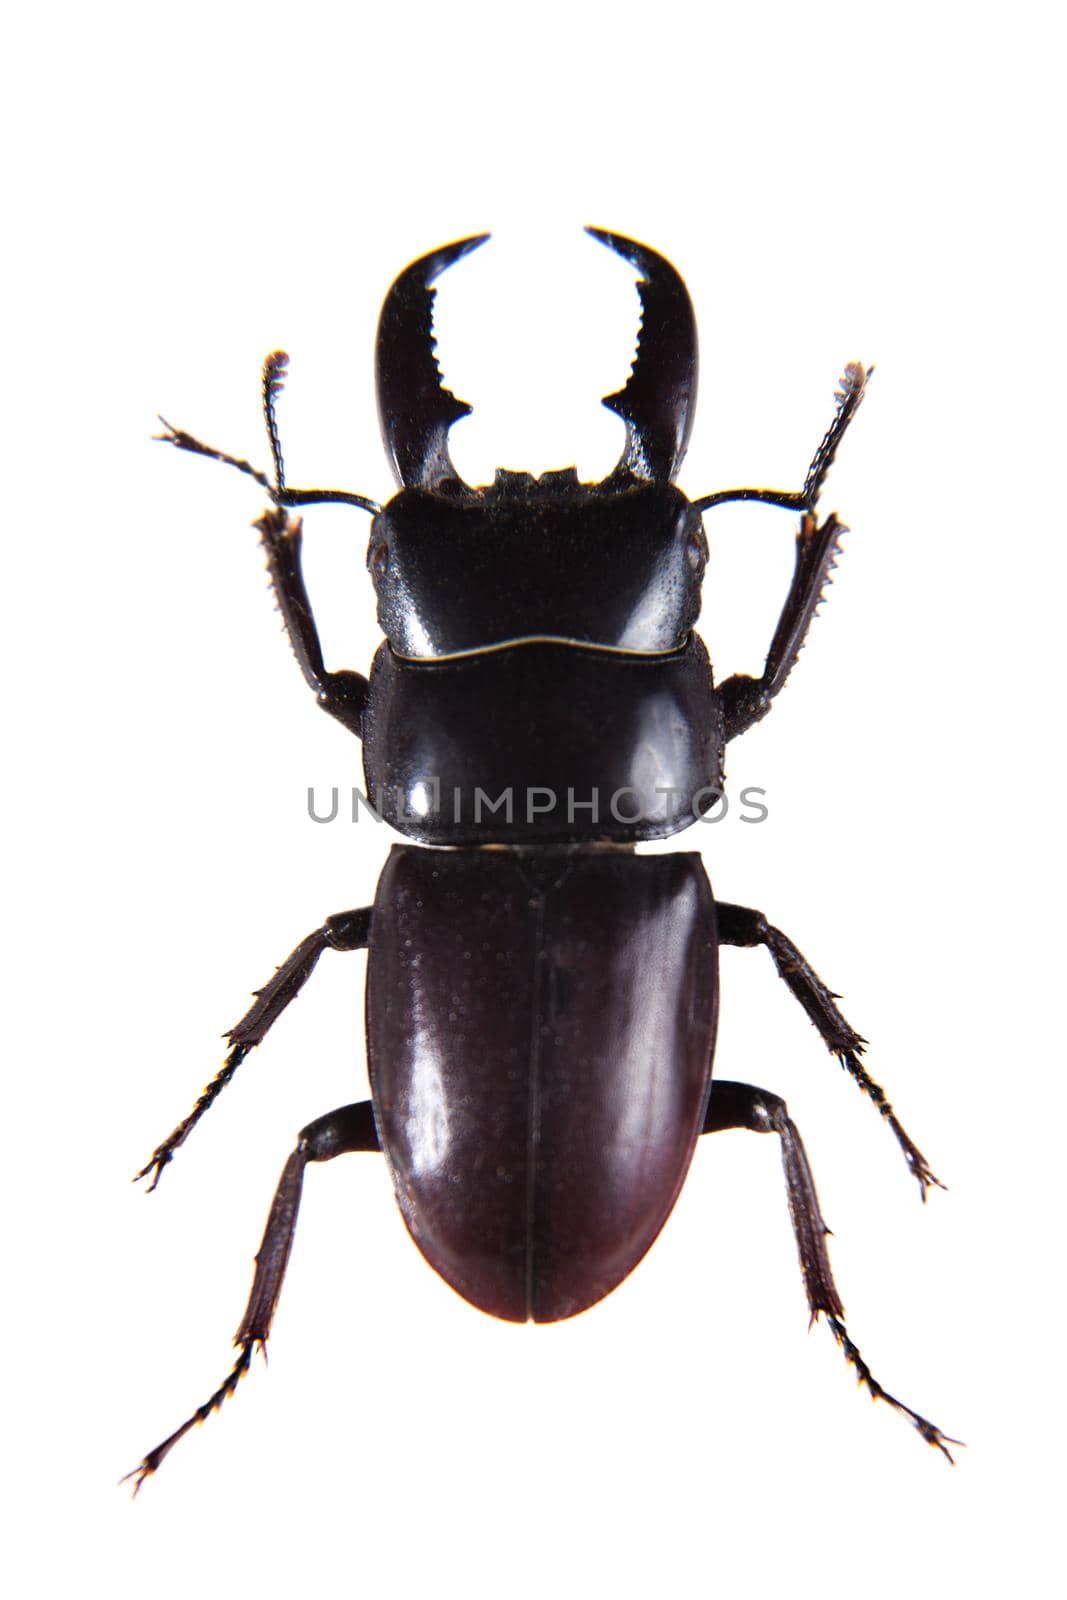 Stag beetle on the white background by RosaJay